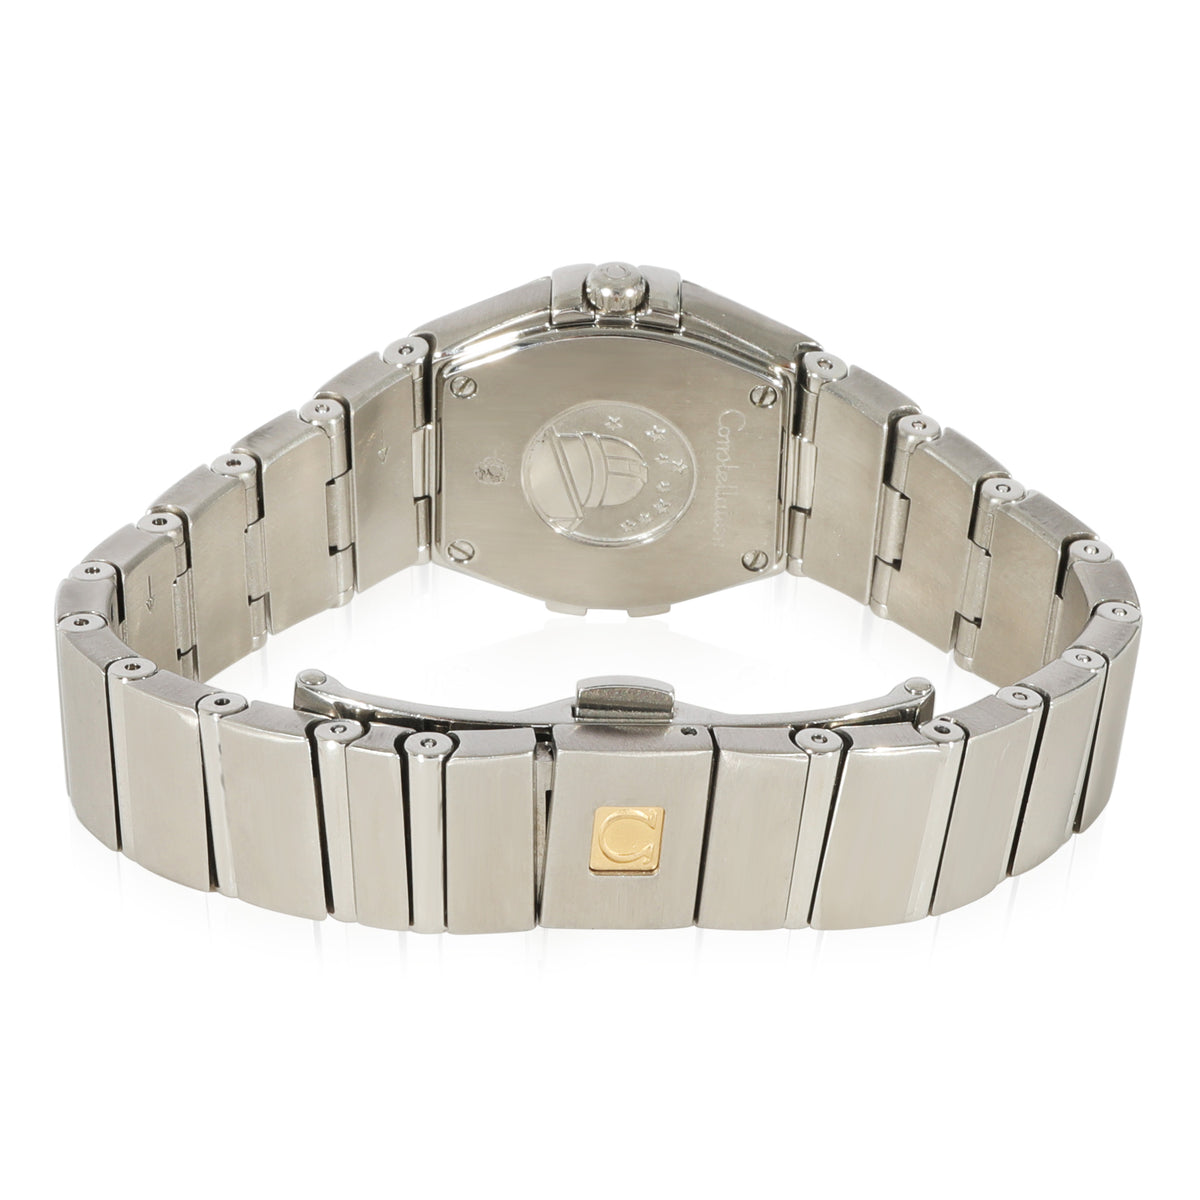 Omega Constellation 123.10.24.60.55.001 Women's Watch in  Stainless Steel